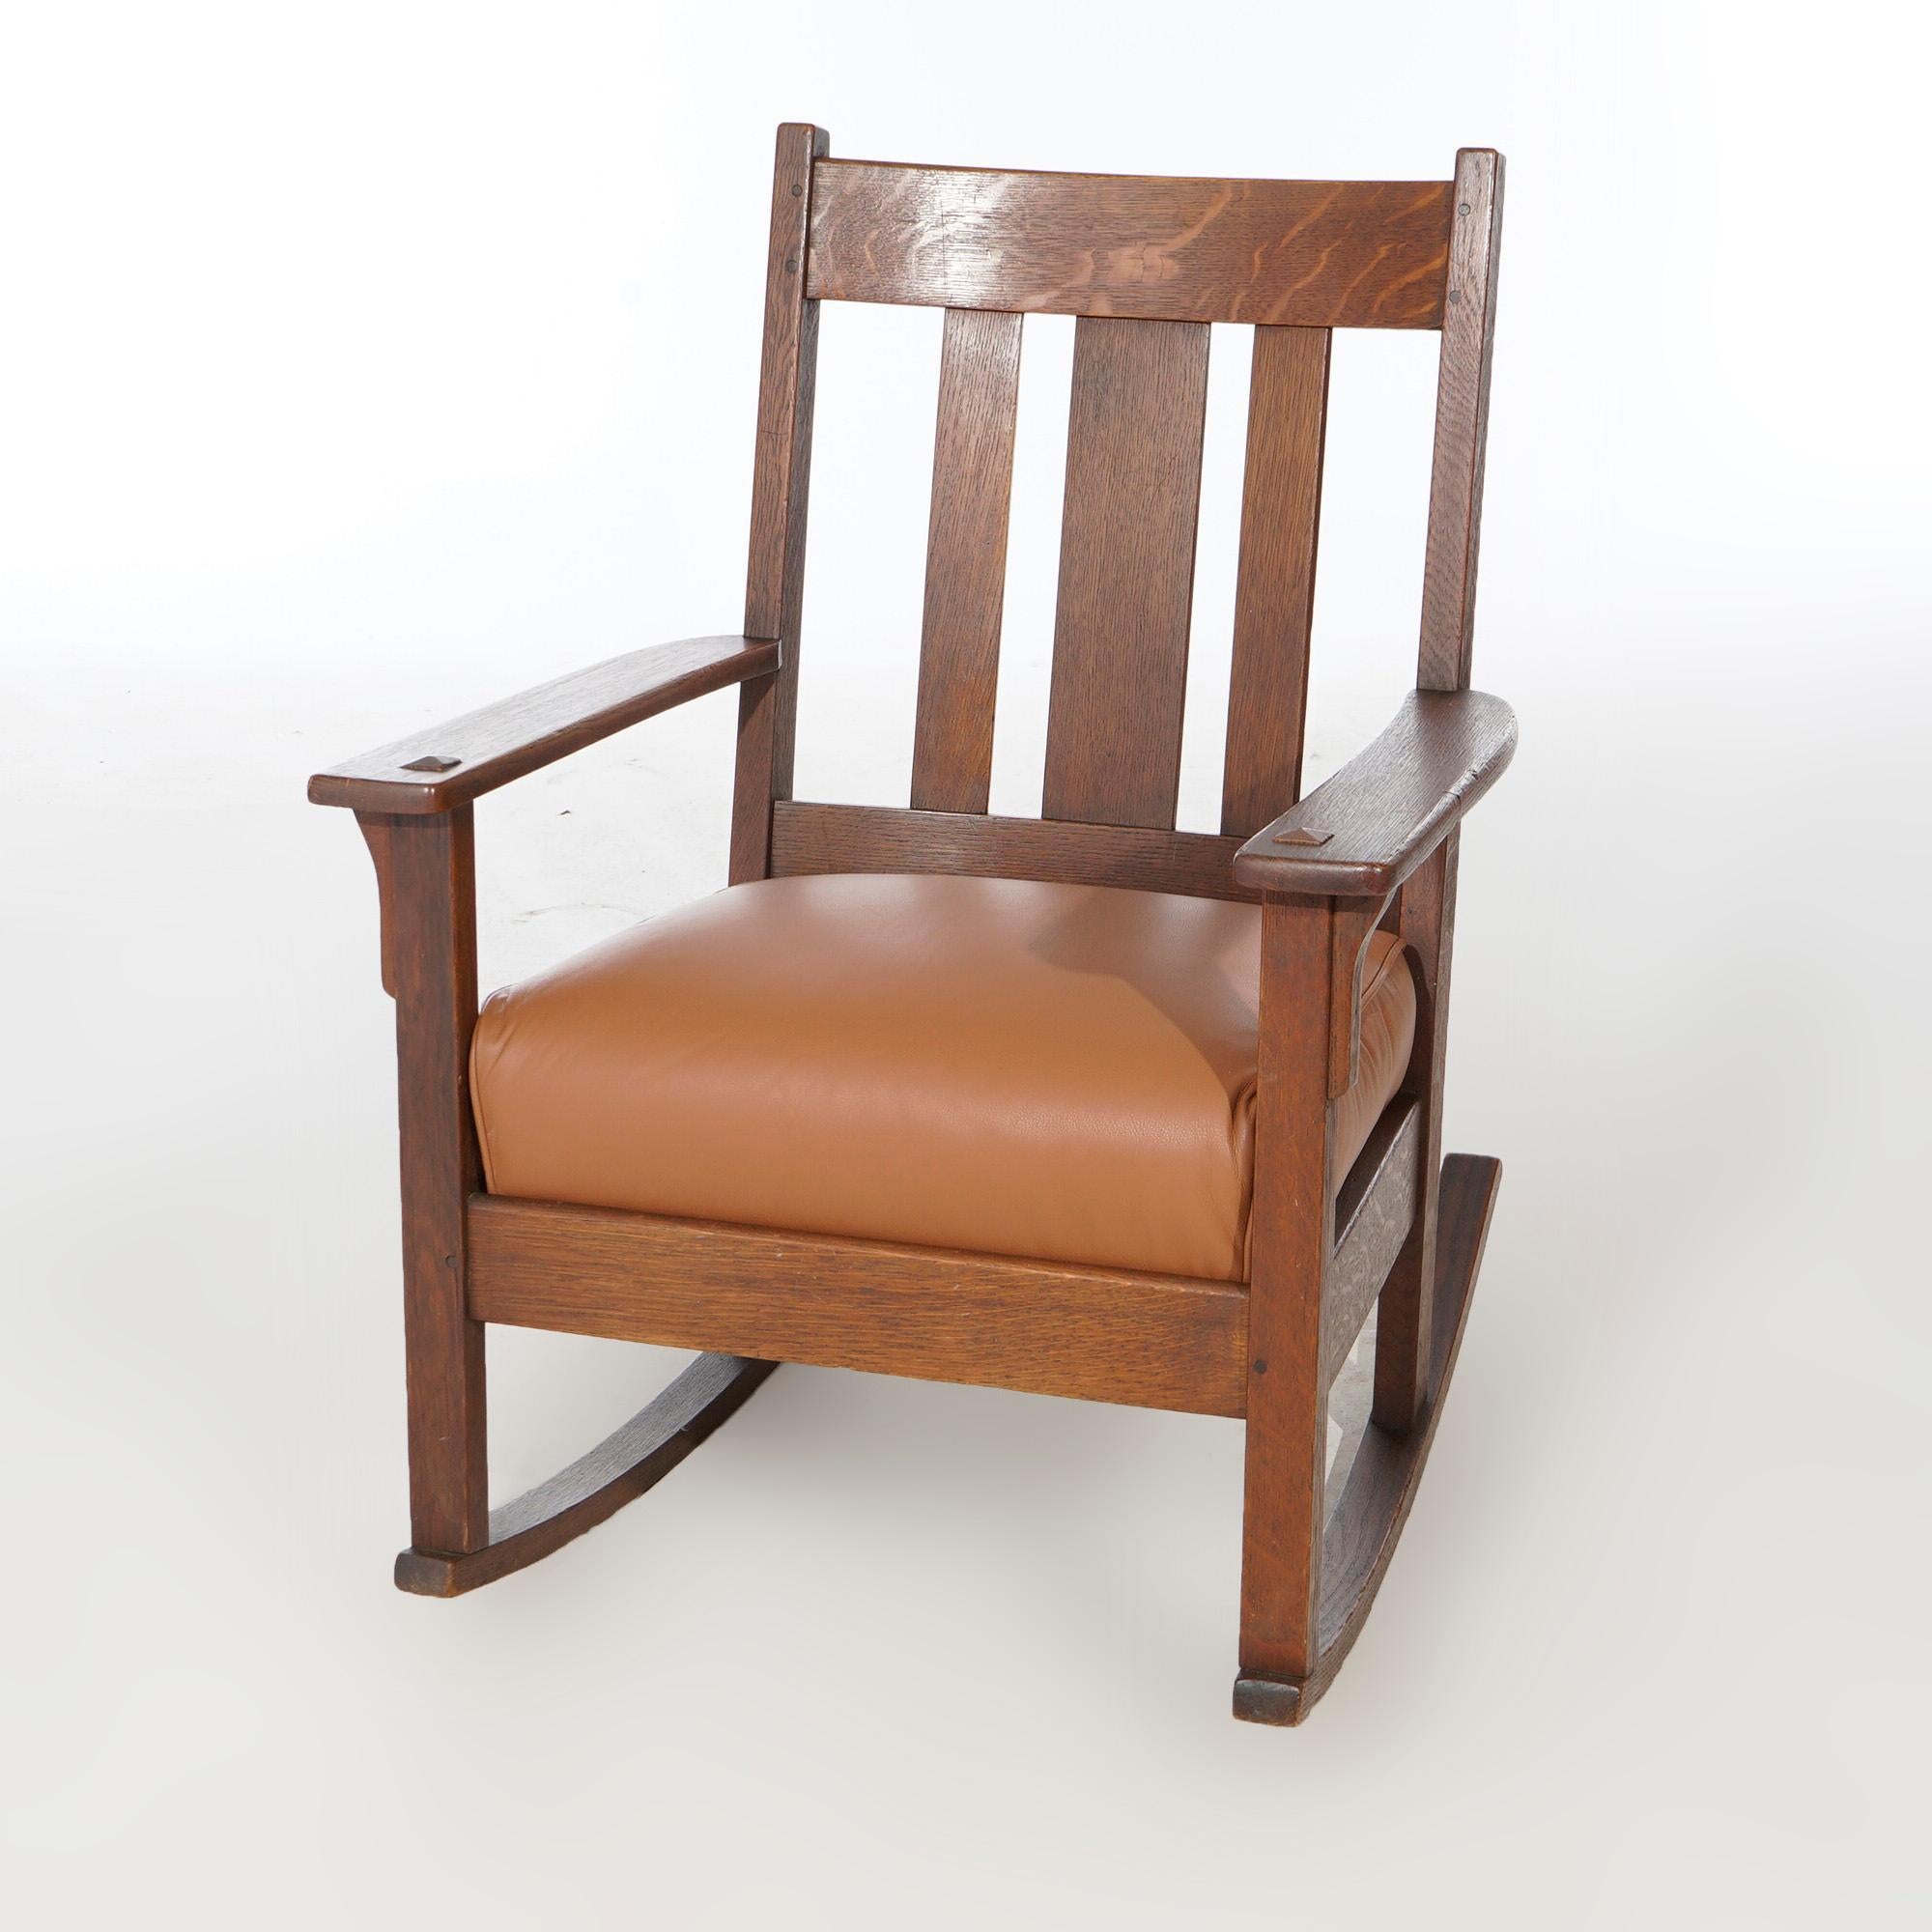 An antique Arts and Crafts rocking chair by JM Young offers quarter sawn oak construction with slat back over upholstered seat, c1910.

Measures- 35''H x 26.75''W x 30''D.

*Ask about DISCOUNTED DELIVERY rates within 1,500 miles of NY*